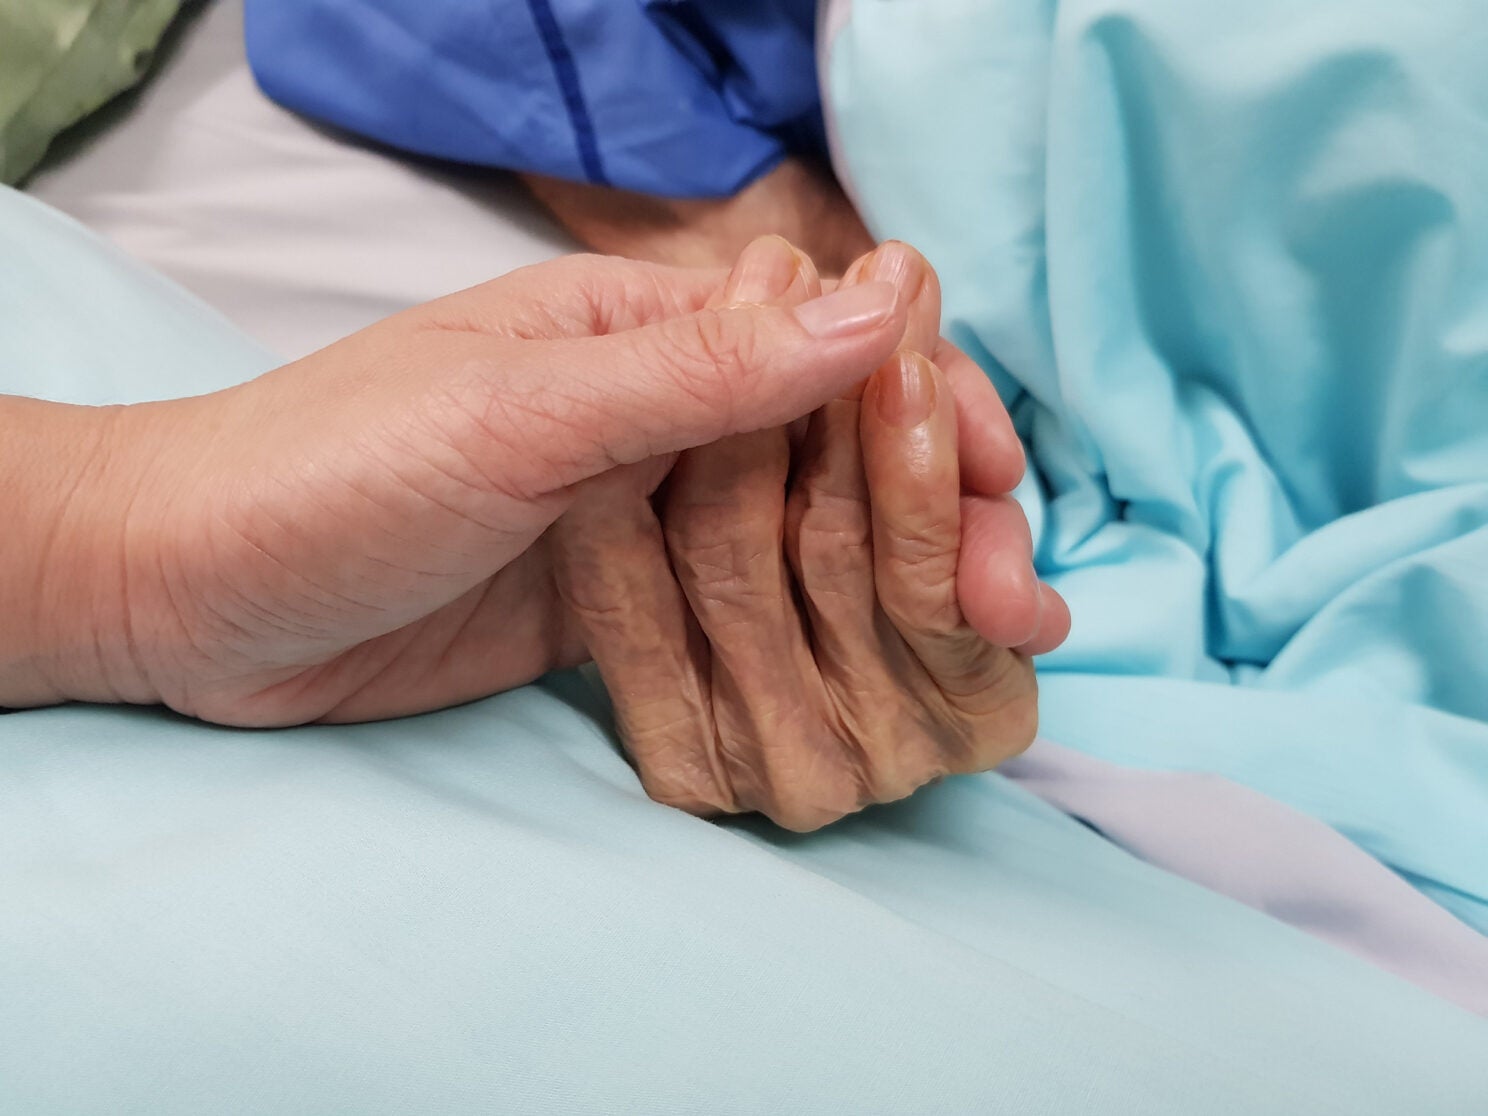 Detail of healthcare worker holding patient